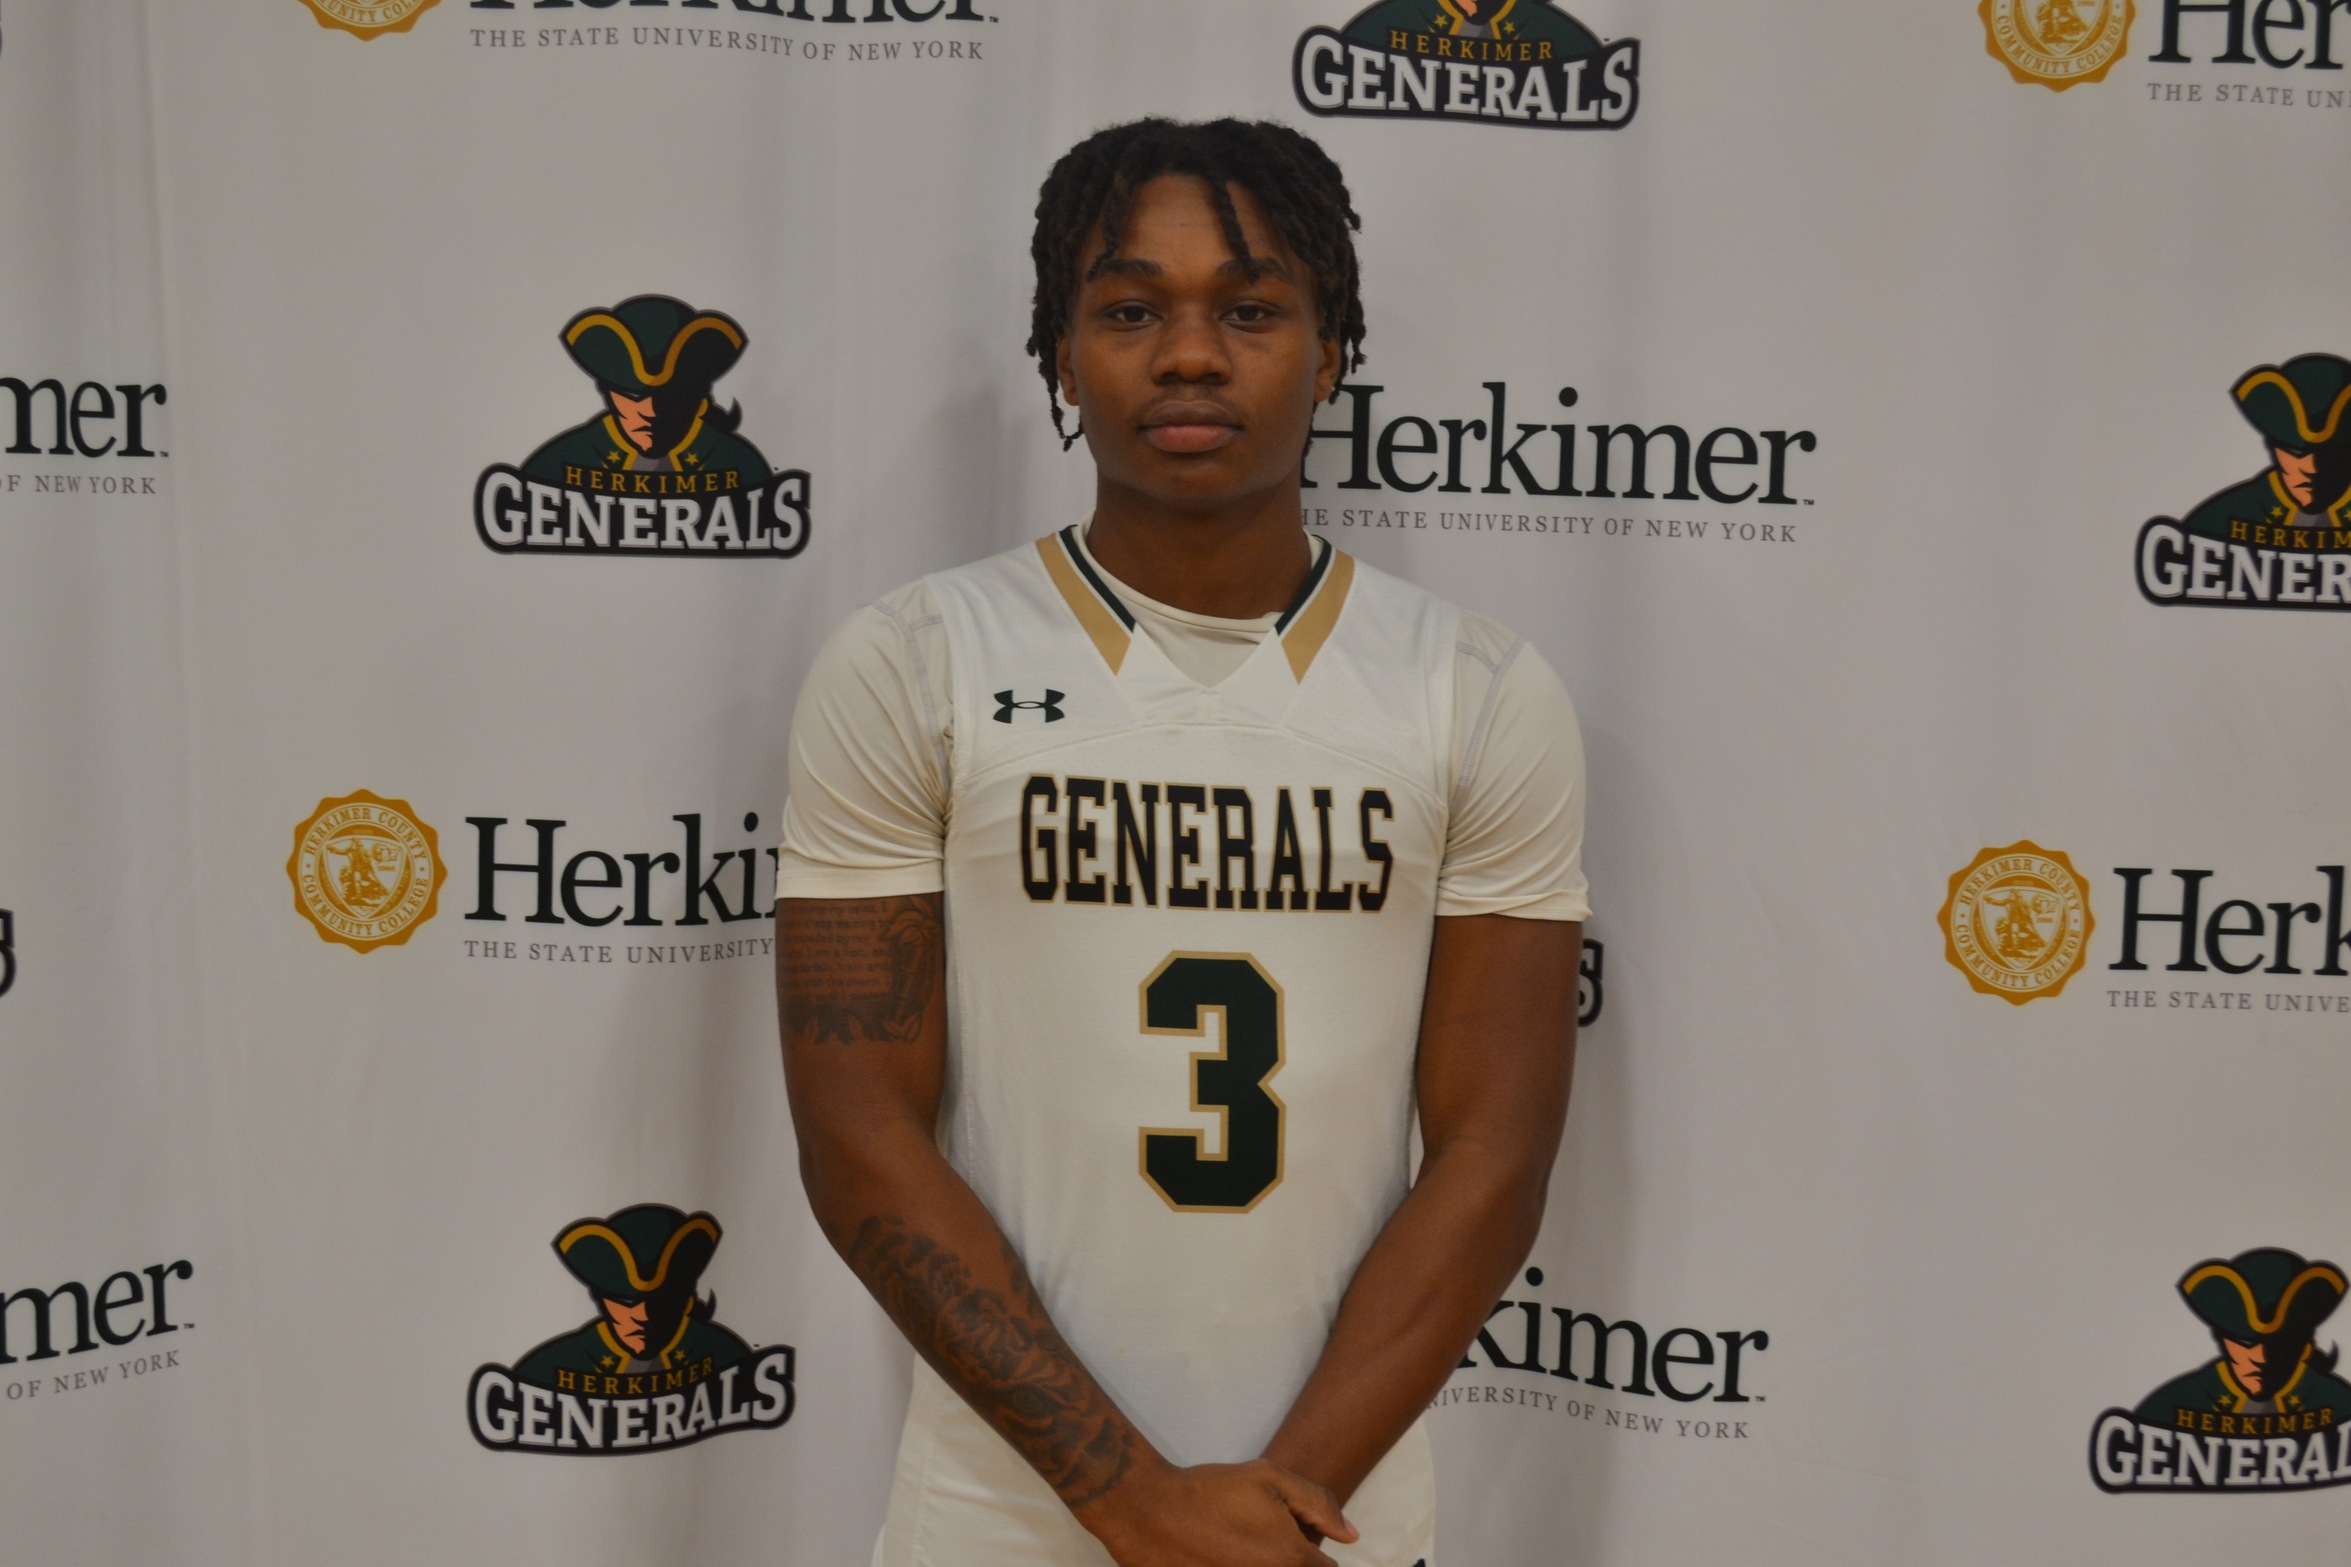 SHYKELL BROWN NAMED GREEN AND GOLD MALE ATHLETE OF THE MONTH